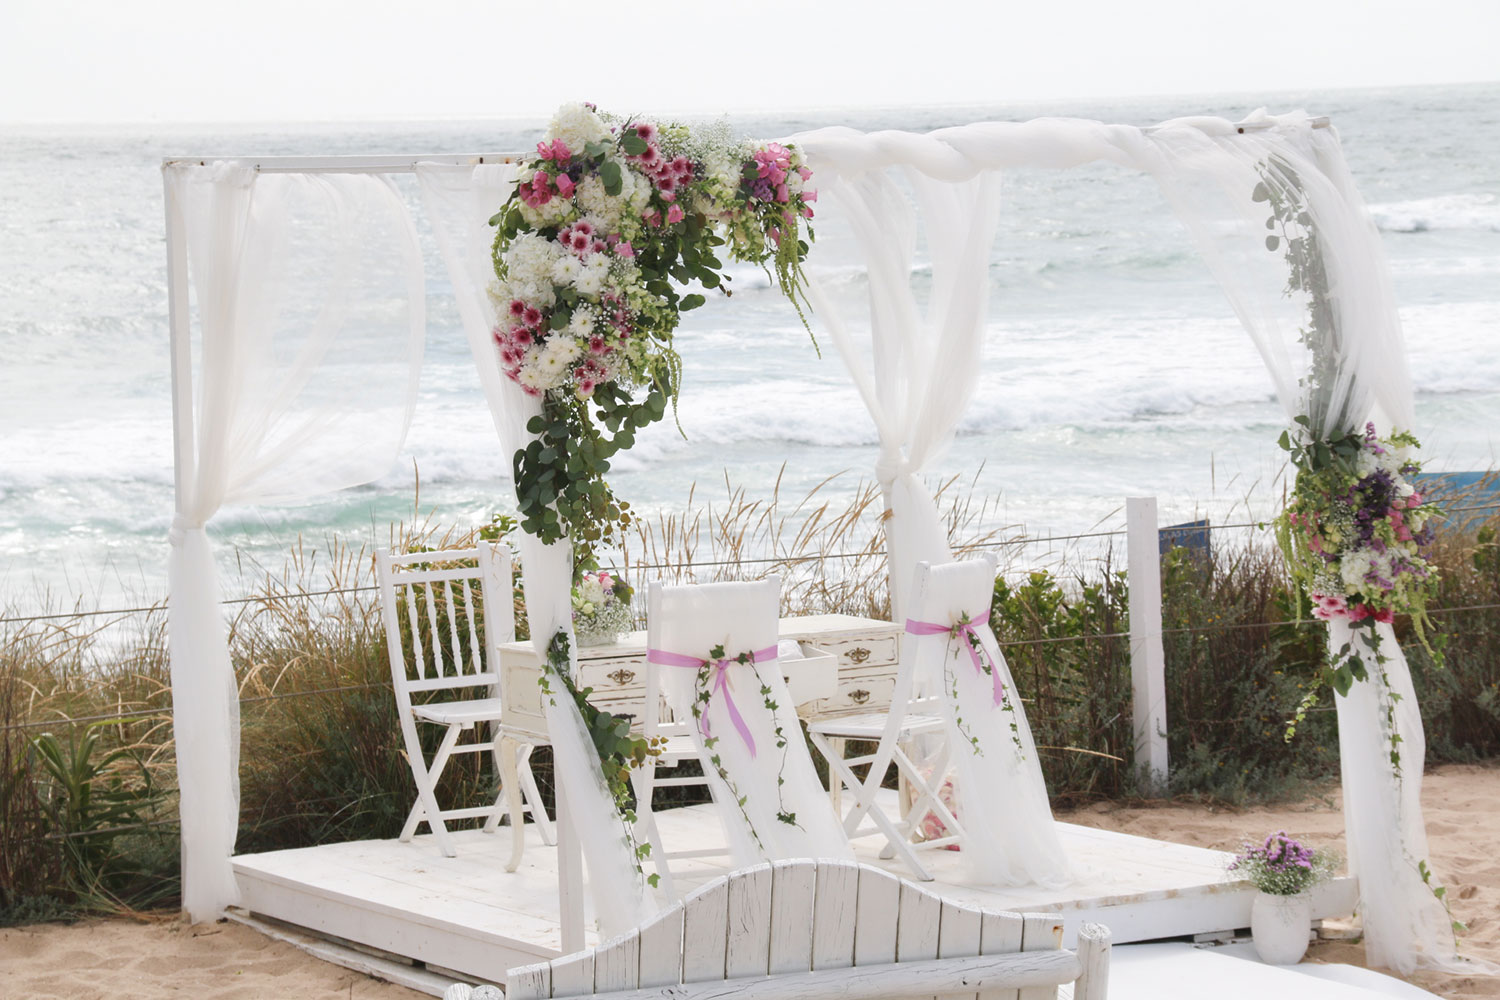 About Events - Portugal wedding planners